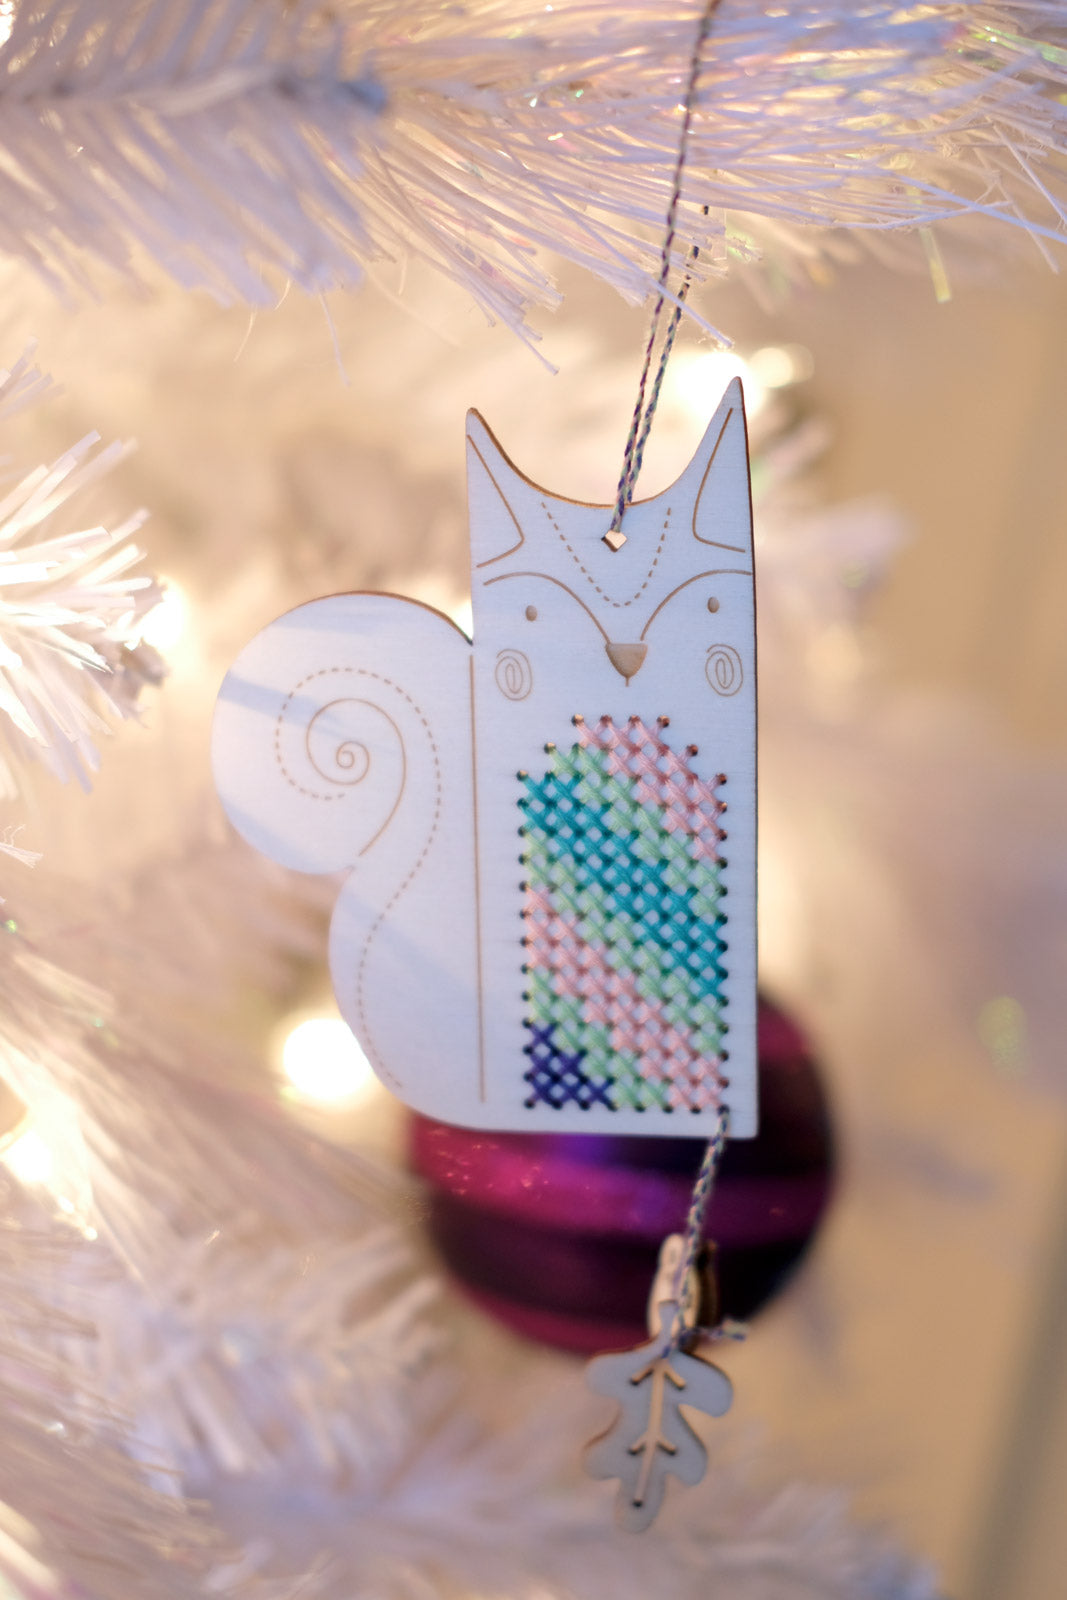 Stuart the Squirrel Crafty Like a Fox ornament hanging on a white tree